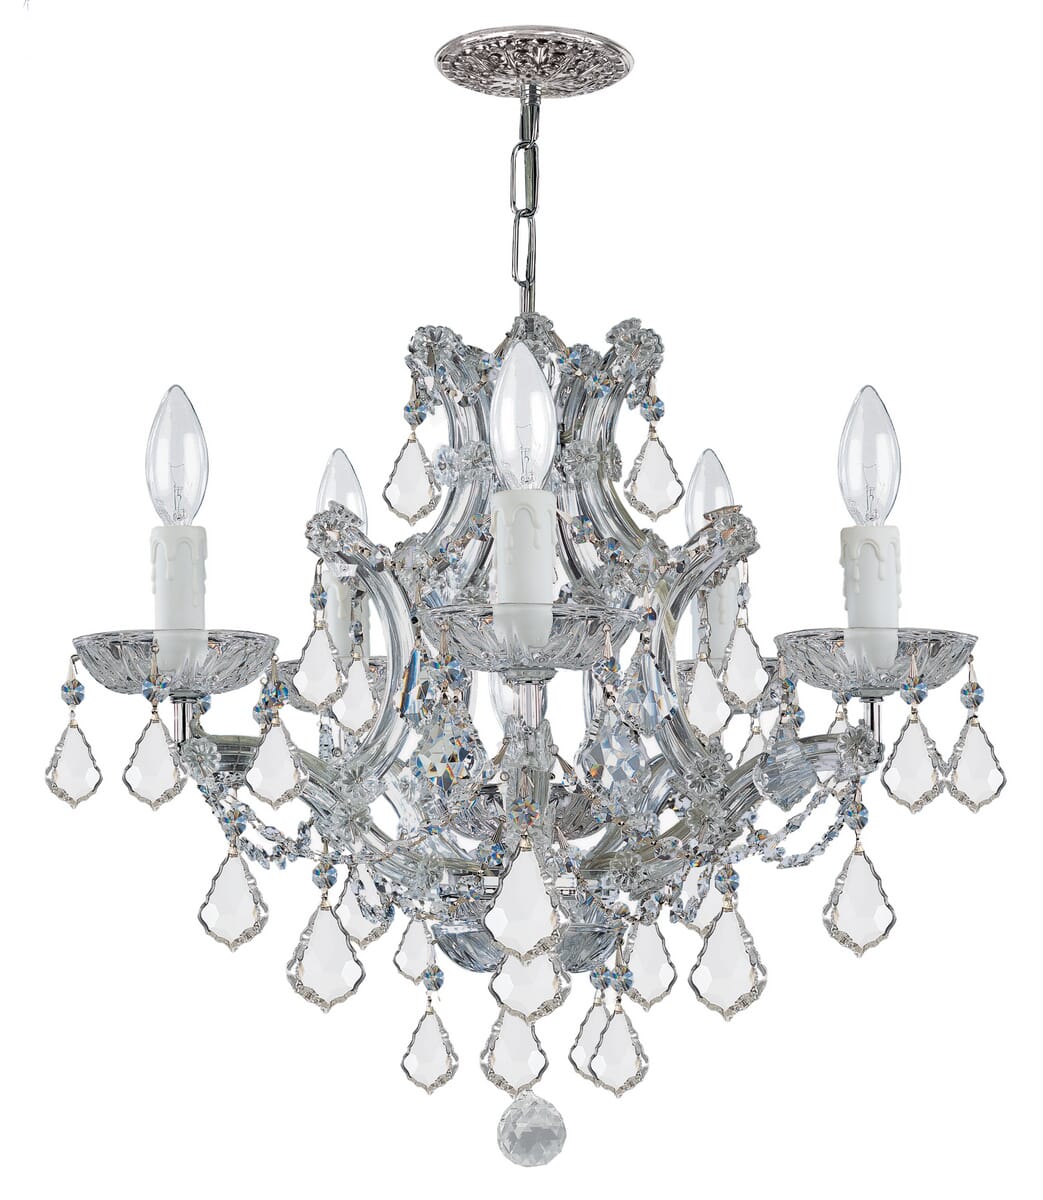 Maria Theresa 6-Light 17"" Mini Chandelier in Polished Chrome with Clear Hand Cut Crystals -  Crystorama, 4405-CH-CL-MWP